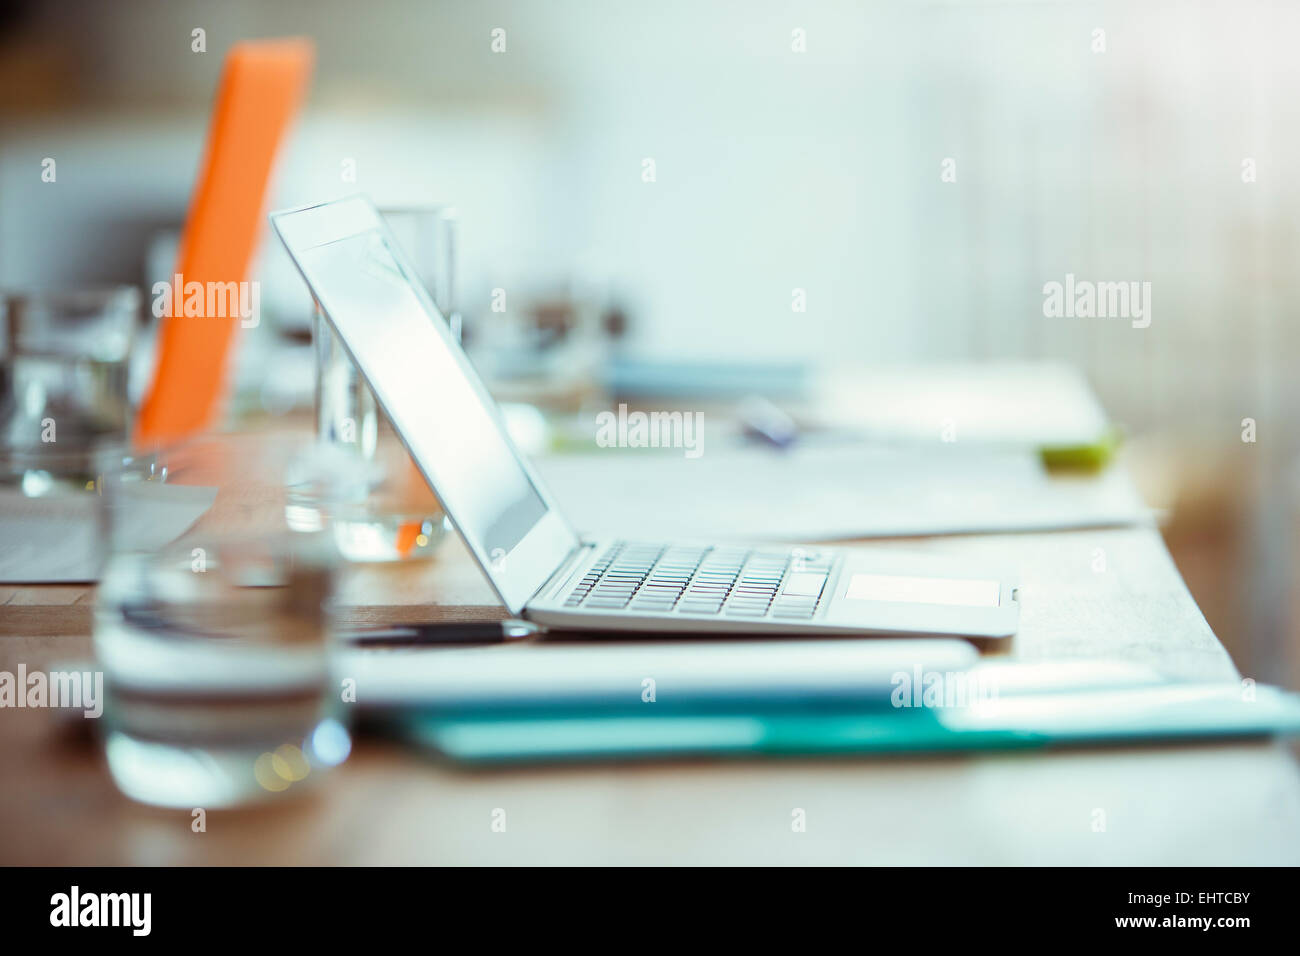 Office supplies, laptop and glass of water on desk in office Stock Photo